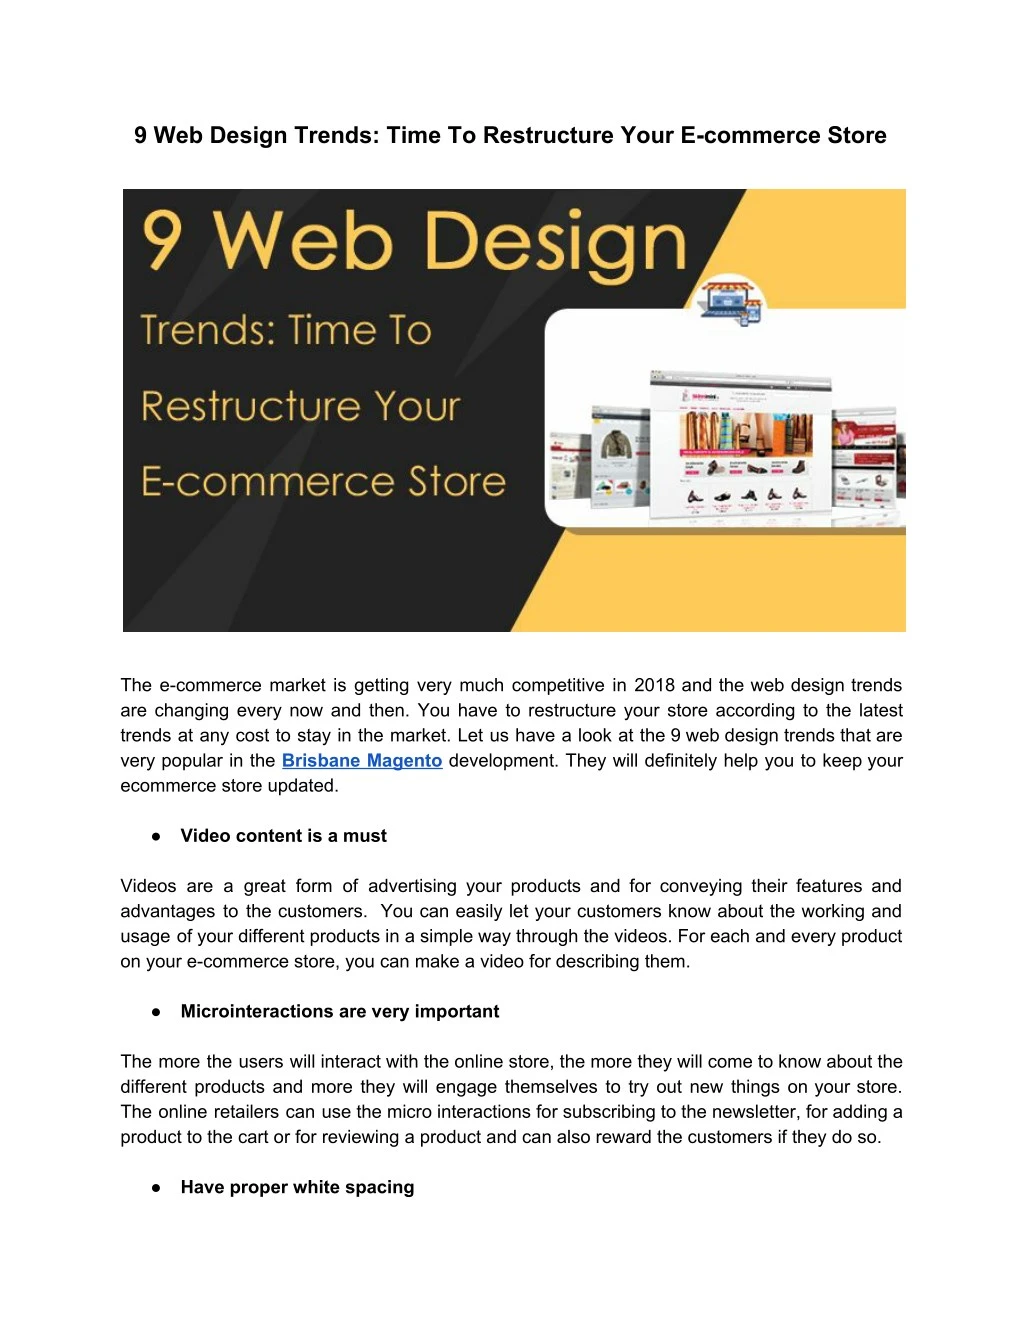 9 web design trends time to restructure your